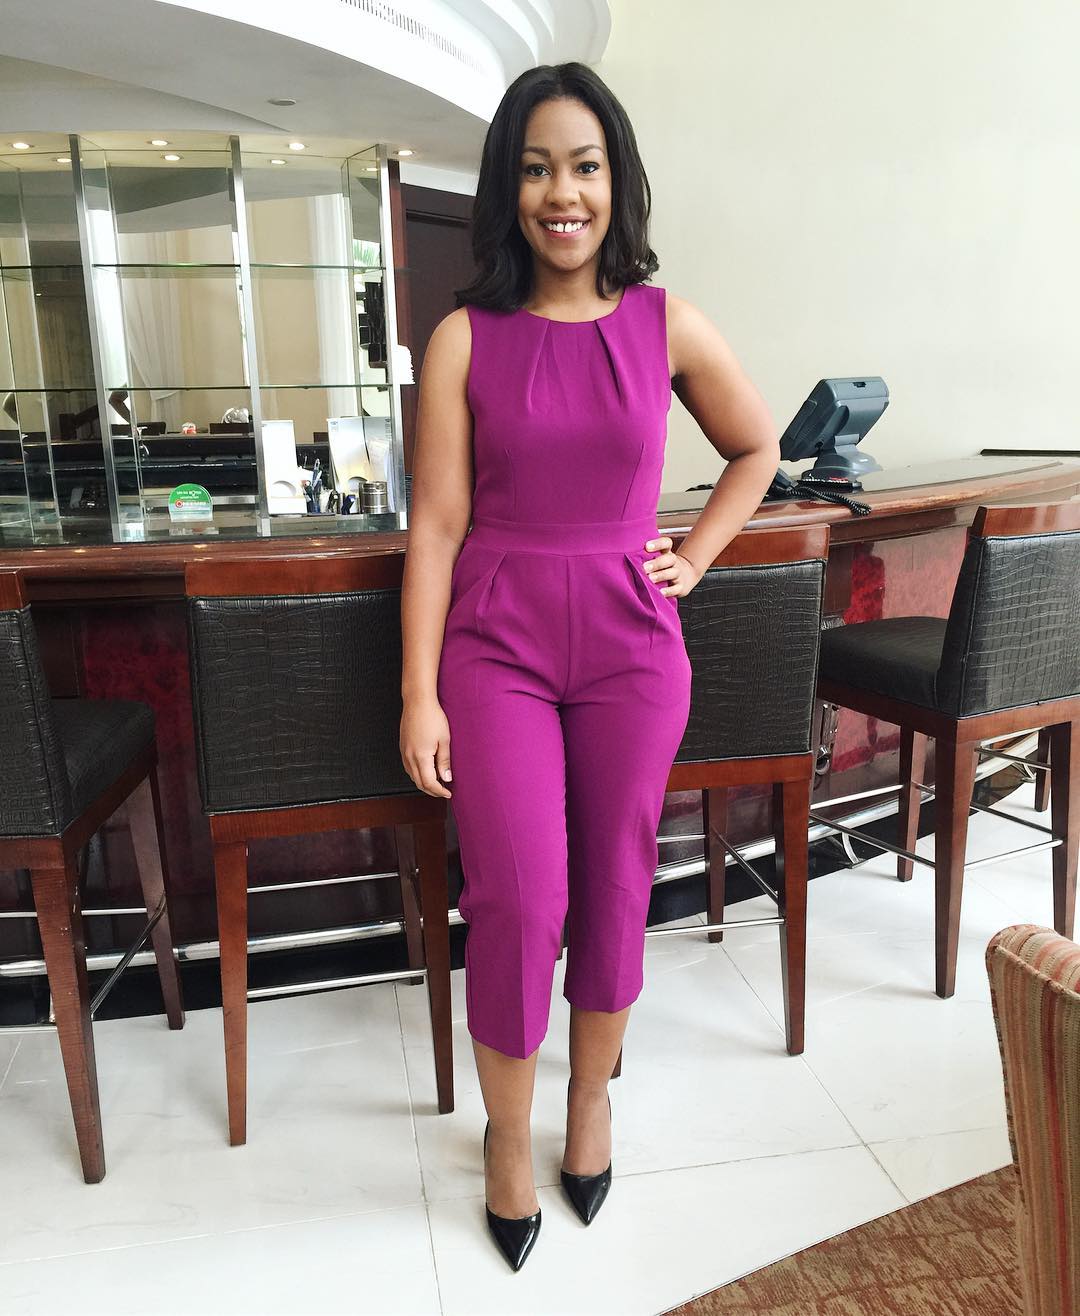 I struggled to fit in after my stay in USA-Victoria Rubadiri admits